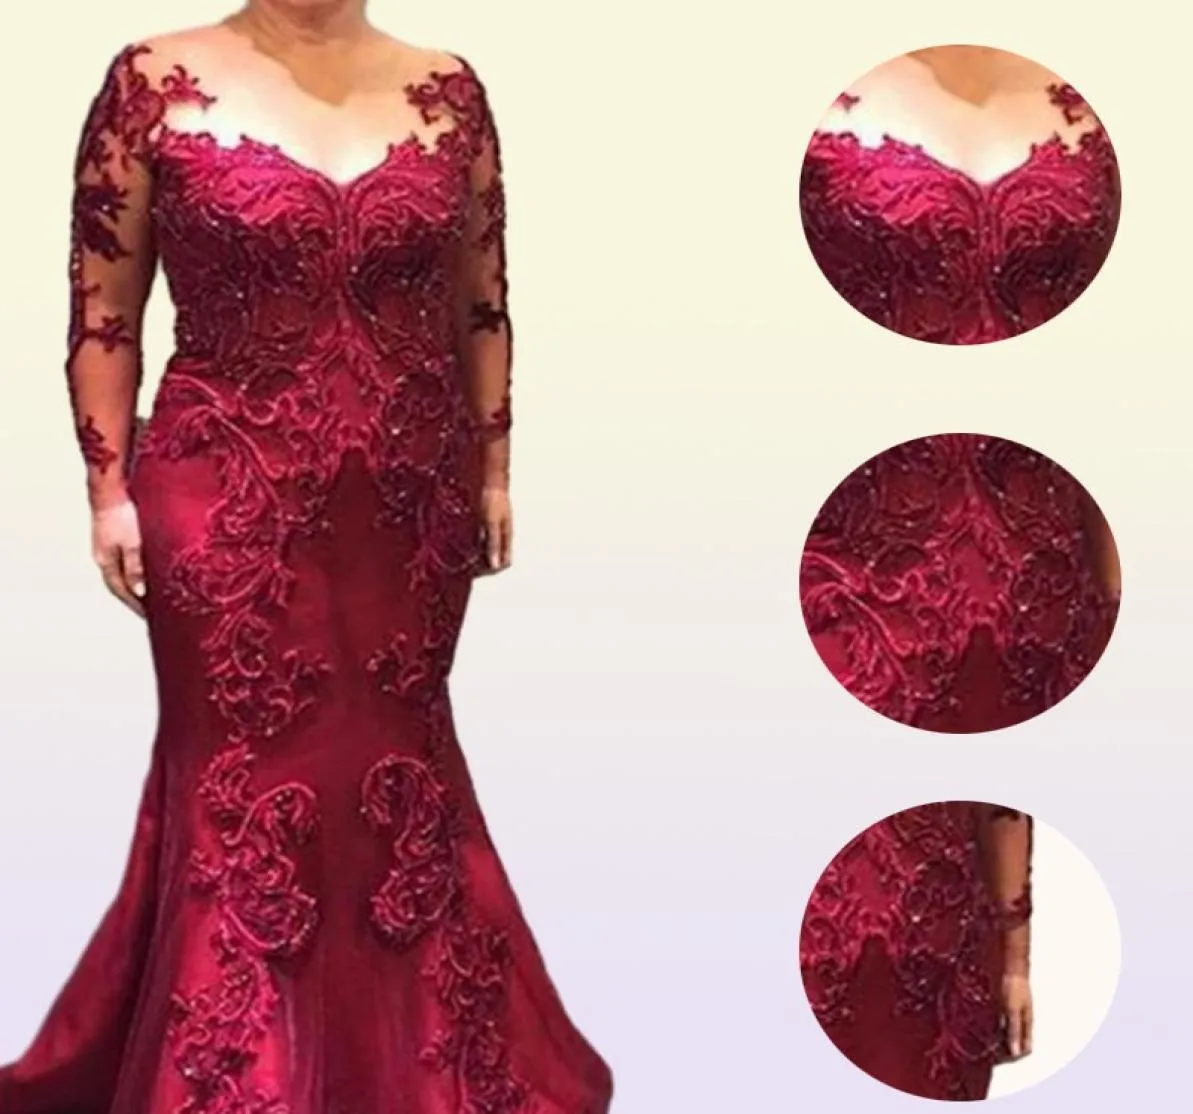 Dark Red 2021 Mother Of The Bride Dresses Lace Appliuque Beading Illusion Long Sleeves Formal Evening Gowns Gorgeous Wedding Groom3354009